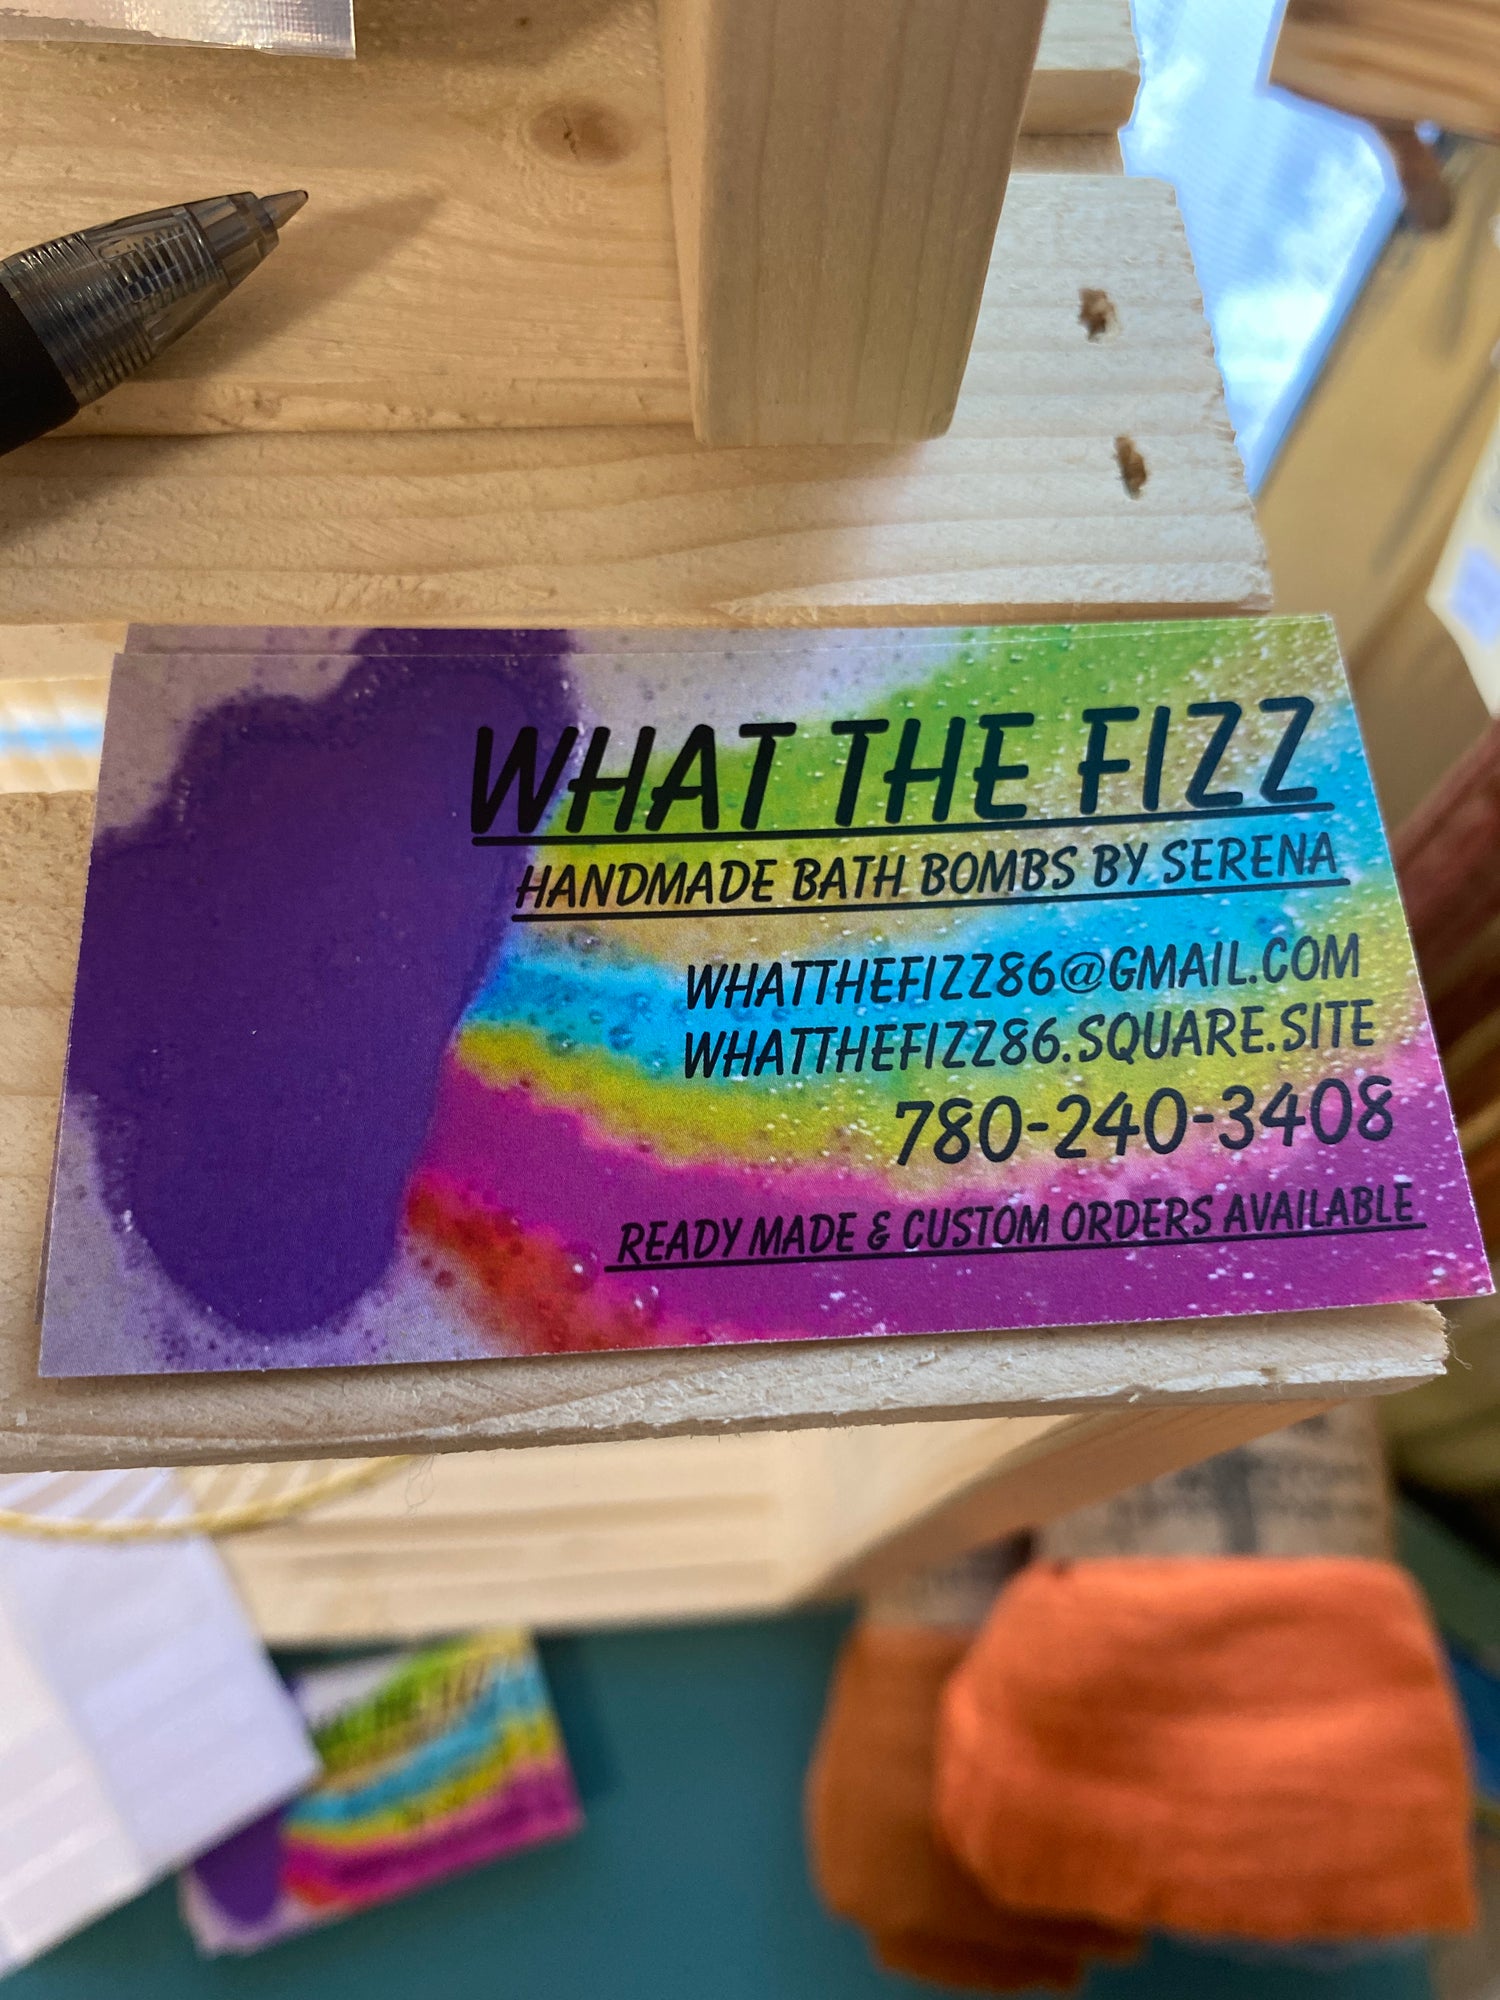 What the fizz